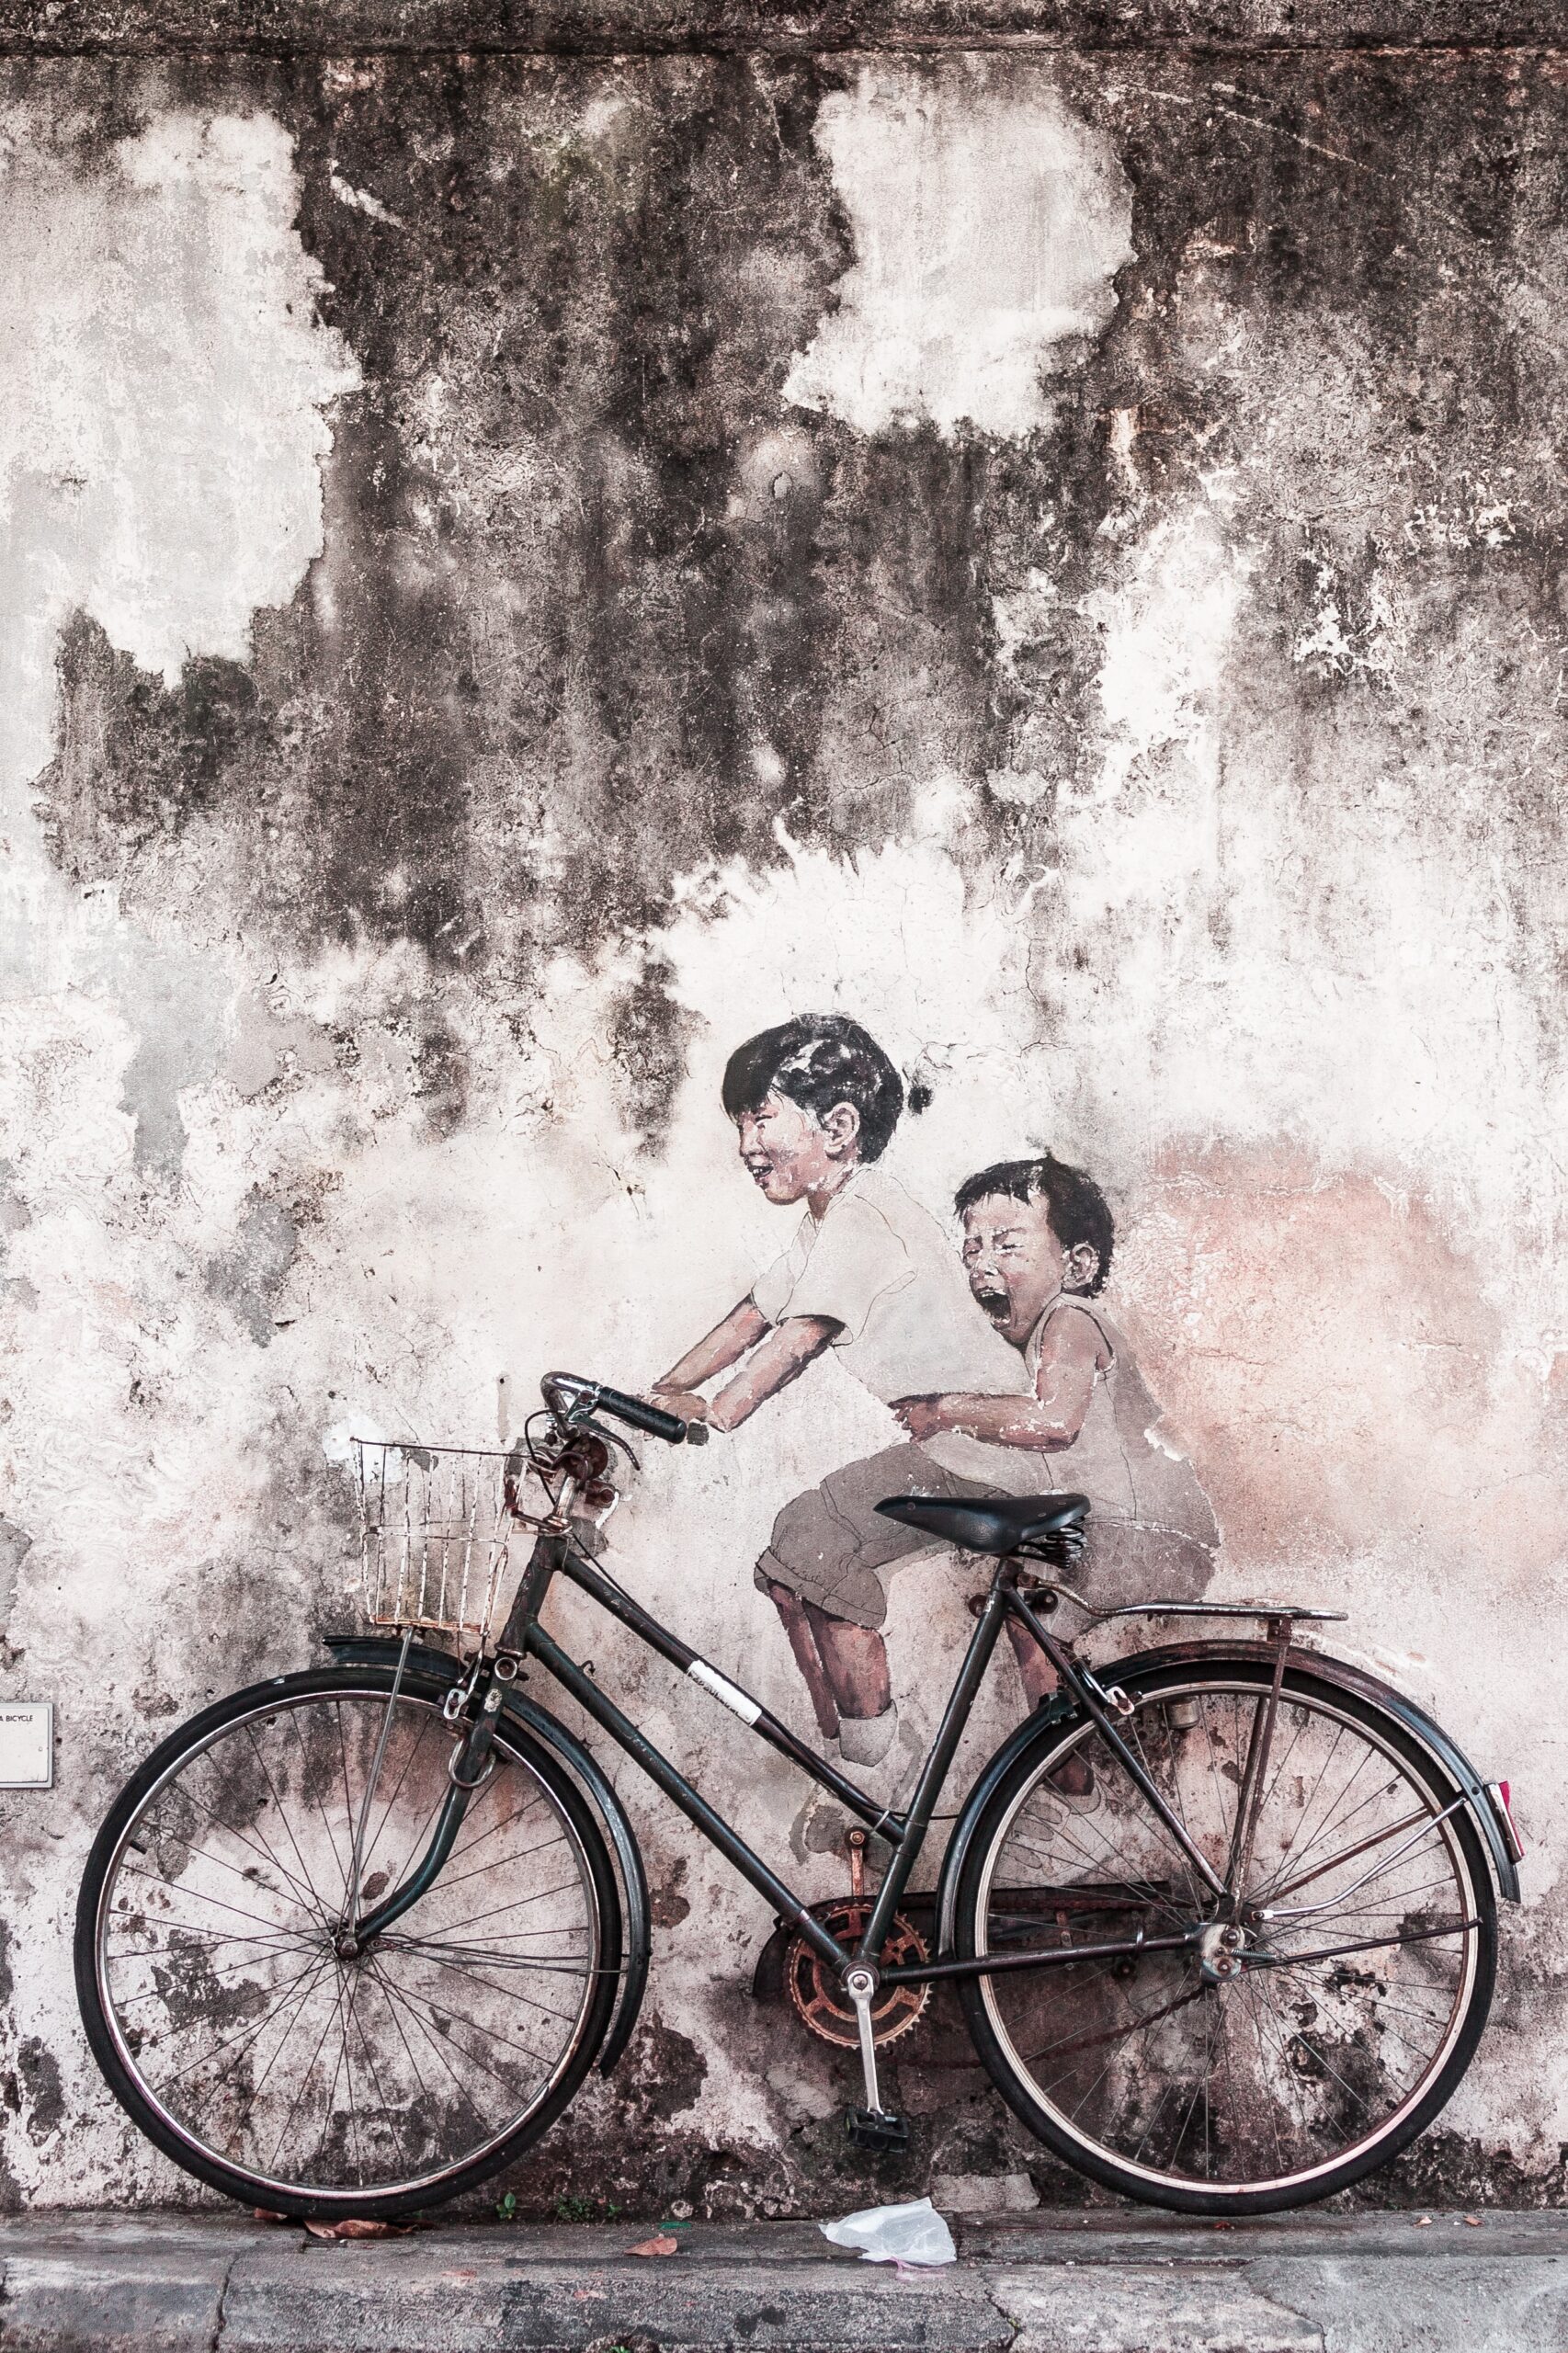 the street art is a must-see during 24 hours in penang 